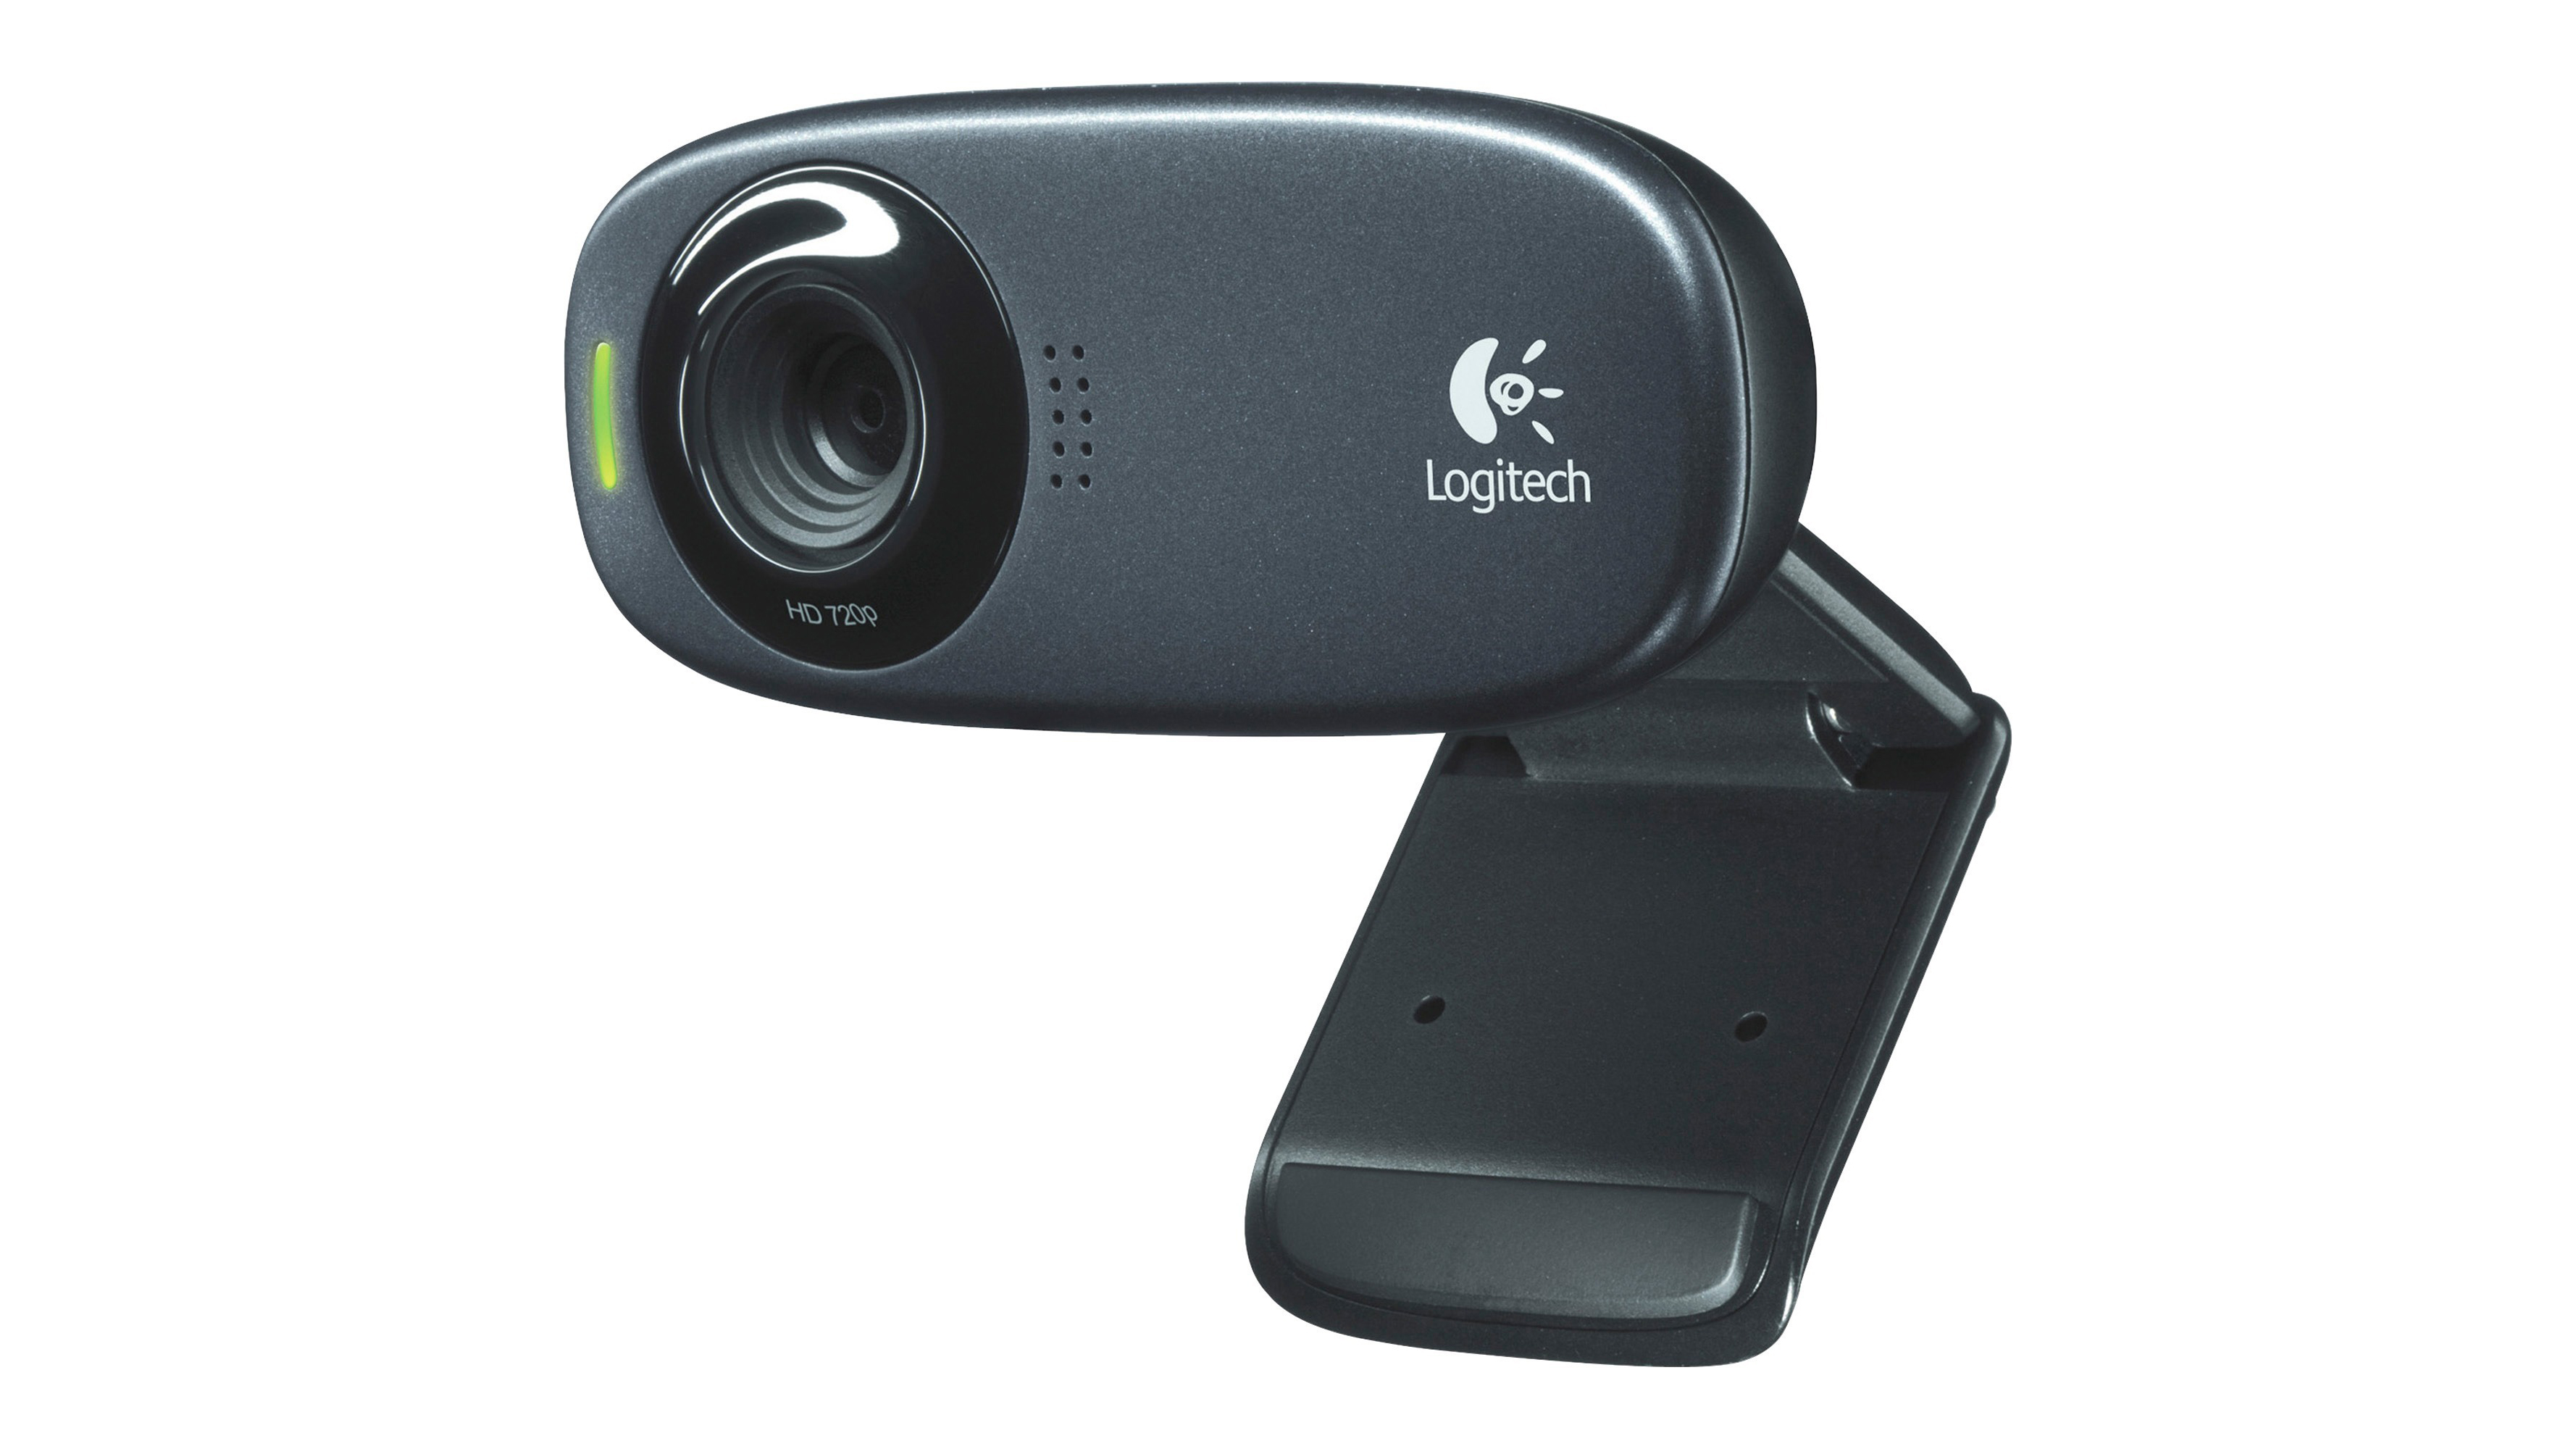 Logitech HD Webcam C310 at an angle against a white background